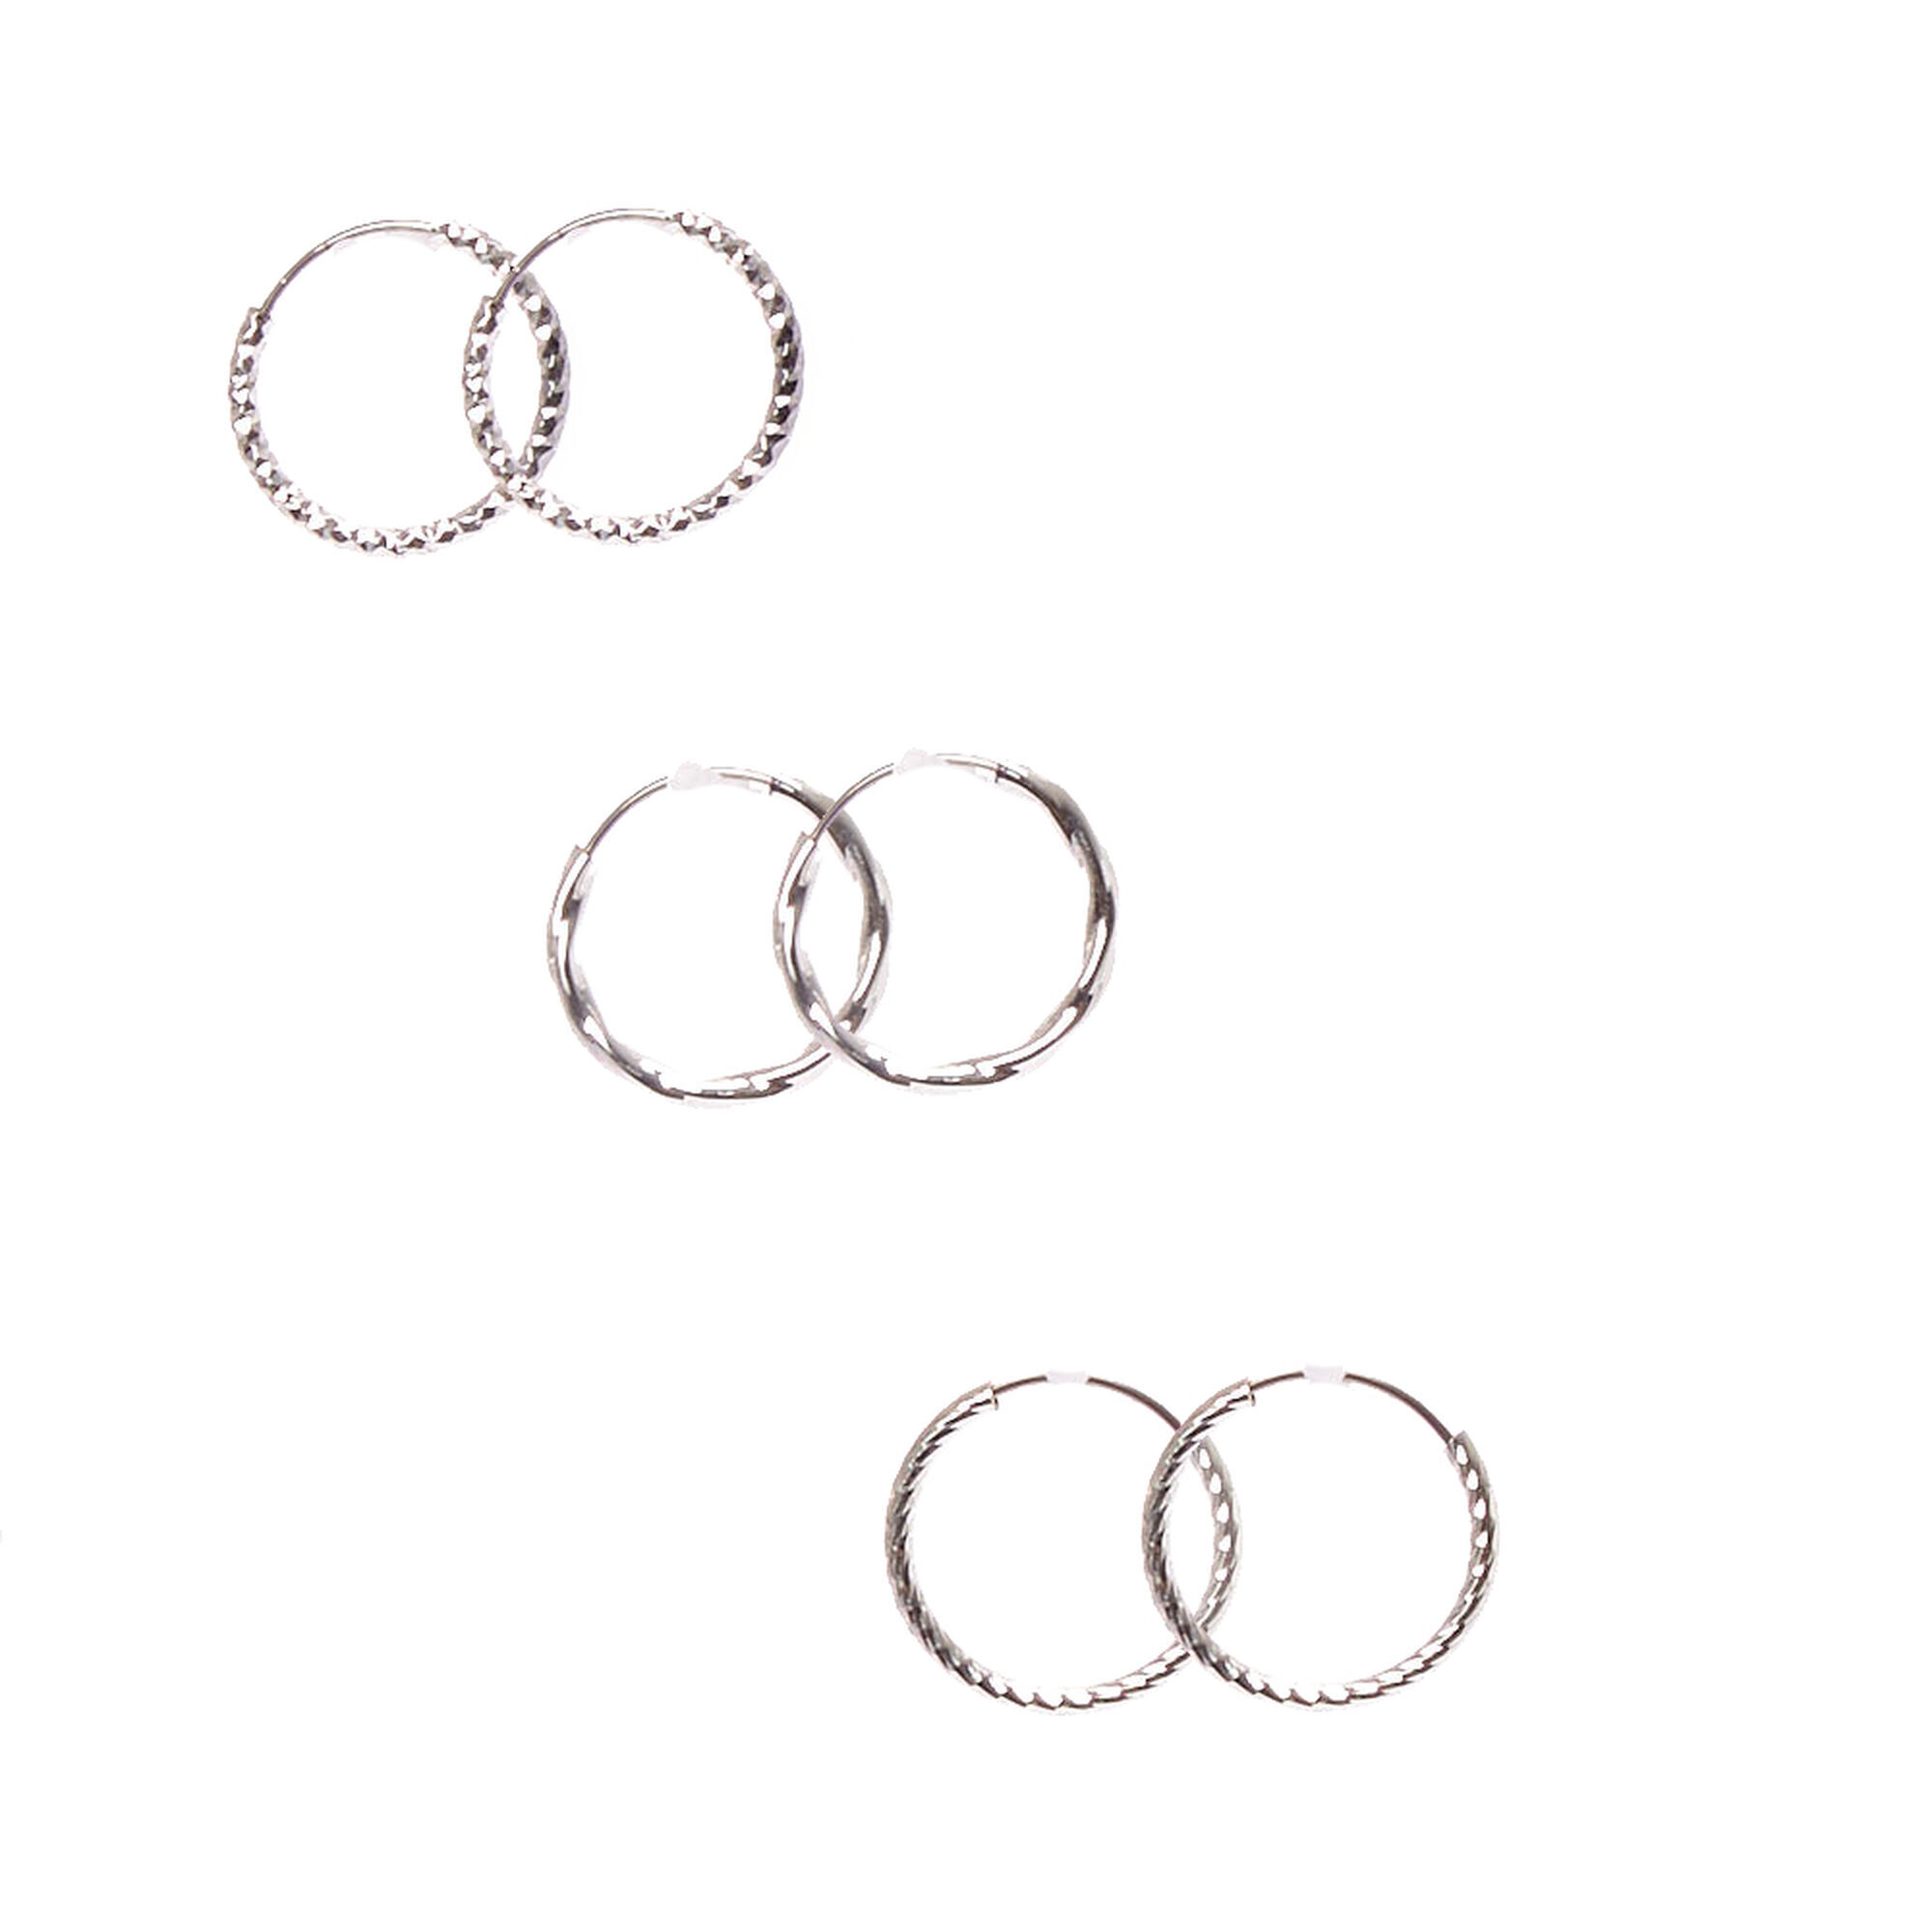 View Claires Tone 15MM Textured Hoop Earrings 3 Pack Silver information